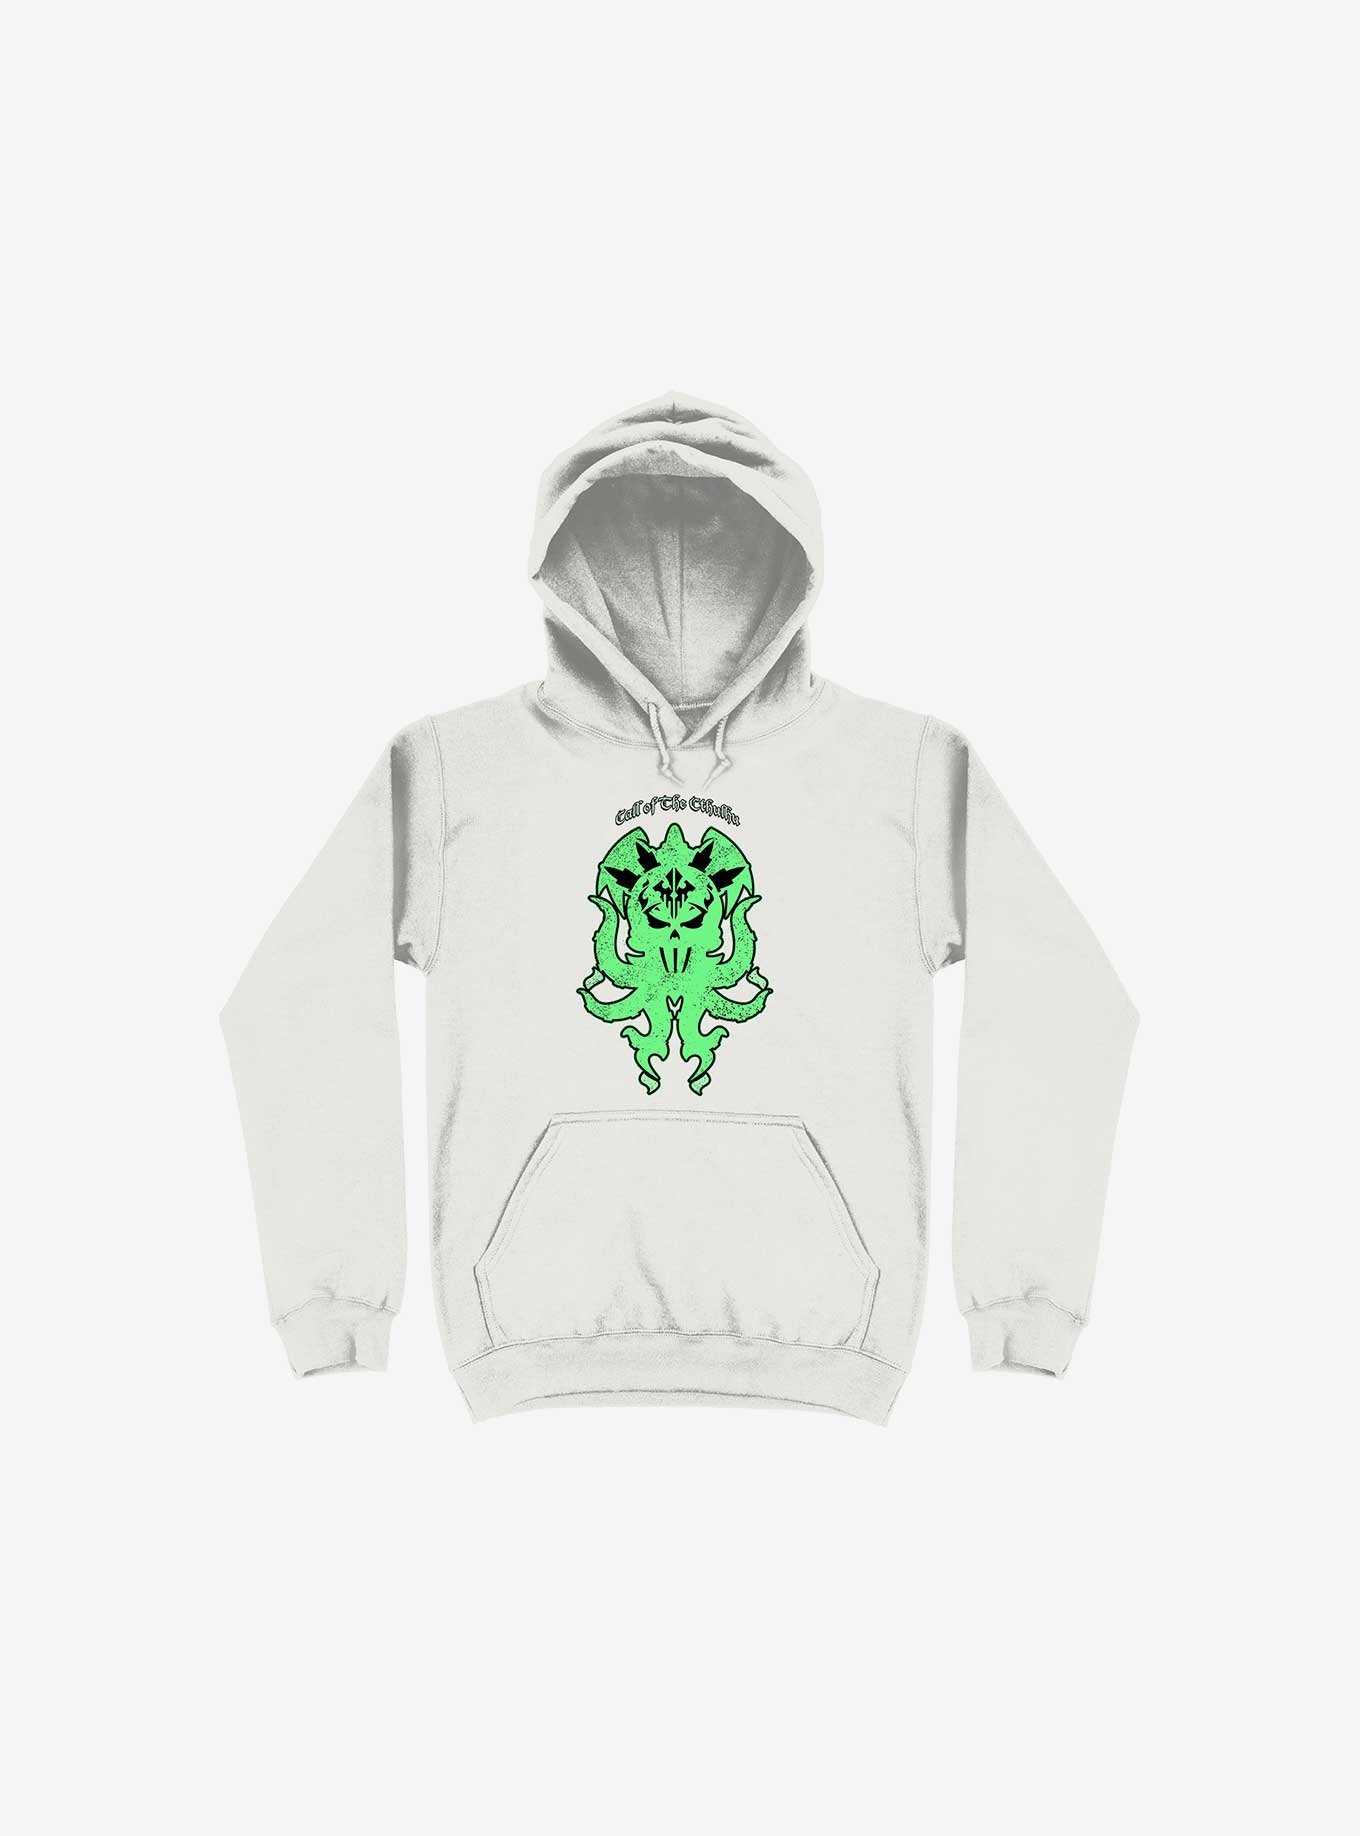 Call Of The Cthulhu Hoodie, , hi-res